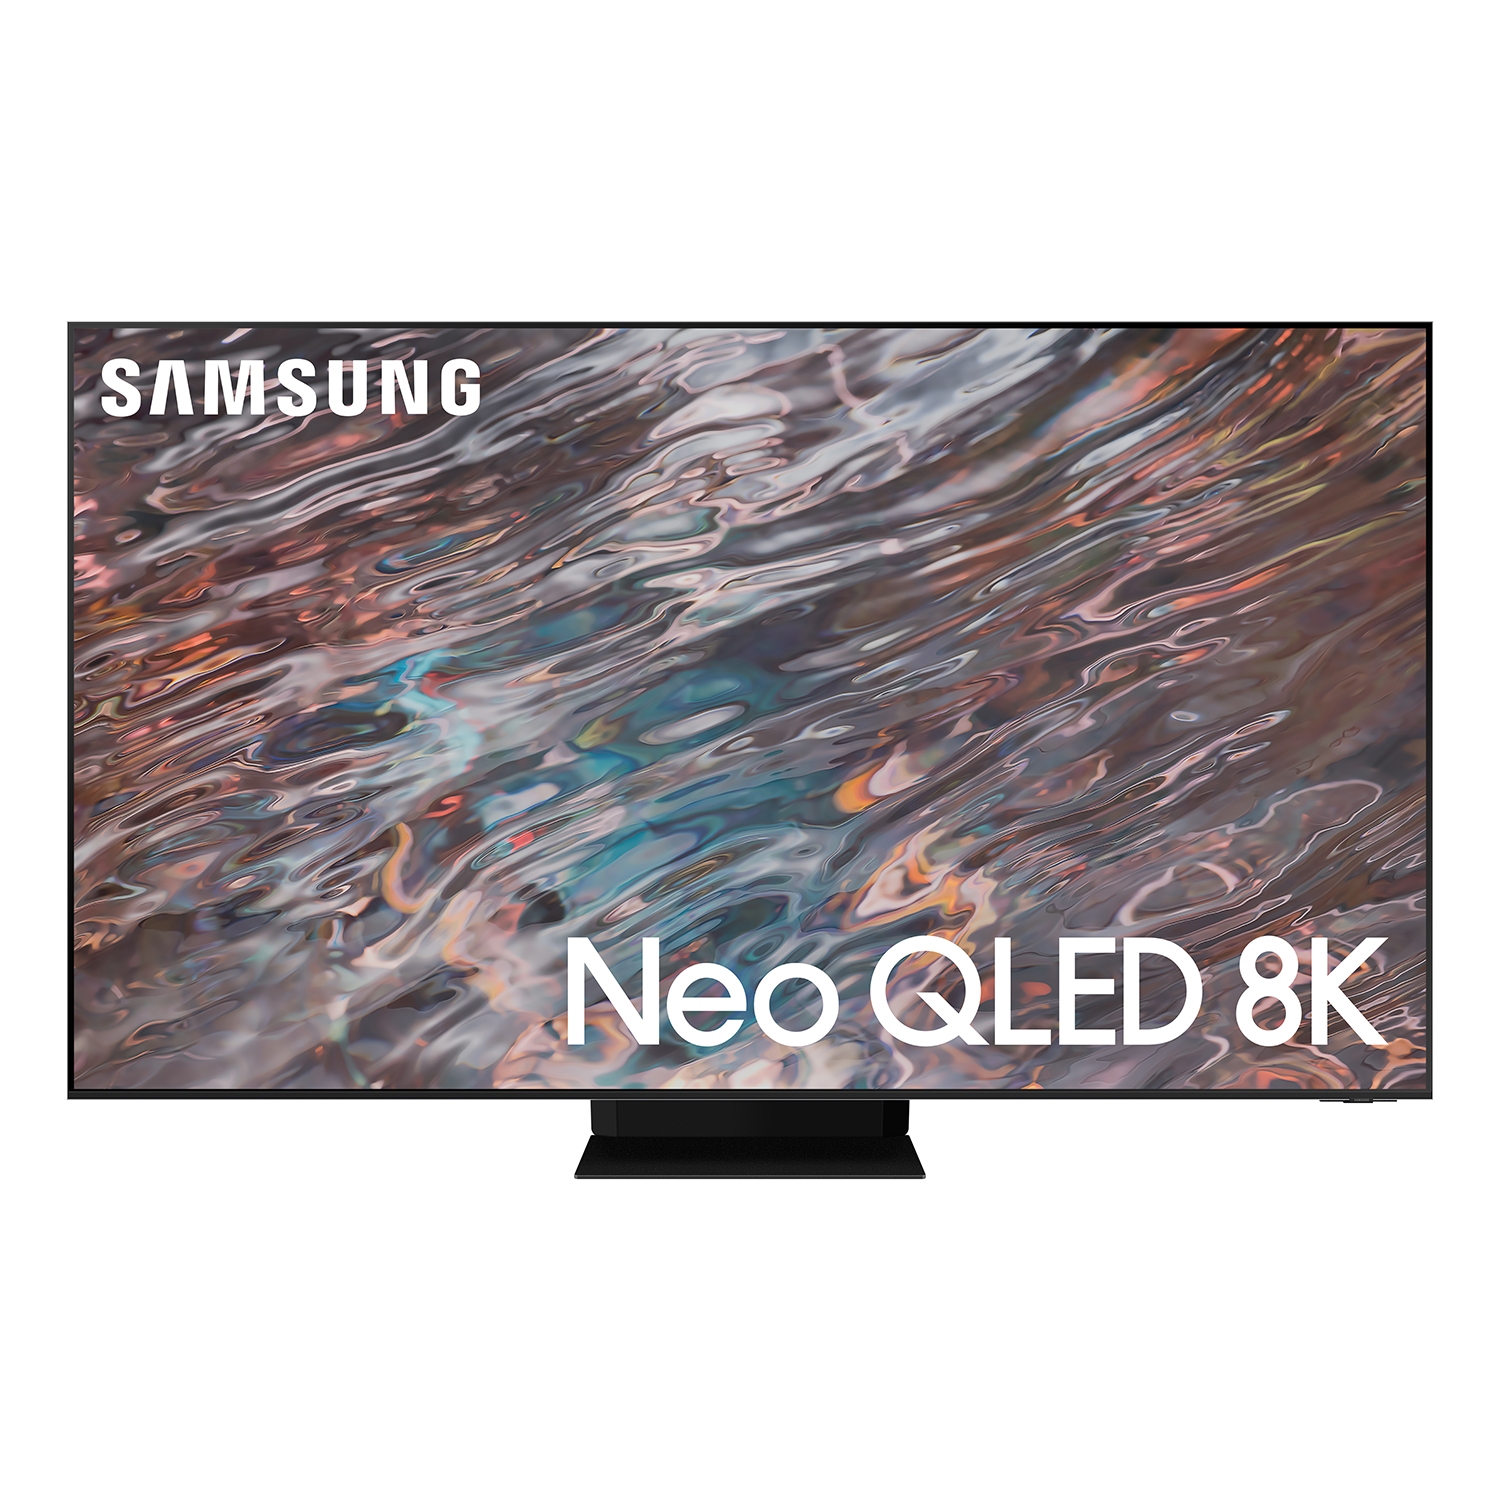 Samsung QE65QN800ATXXU 65" 8K Neo QLED Smart TV Quantum HDR 2000 powered by HDR10+ with Ultra Viewing Angle and Anti Reflection - 0